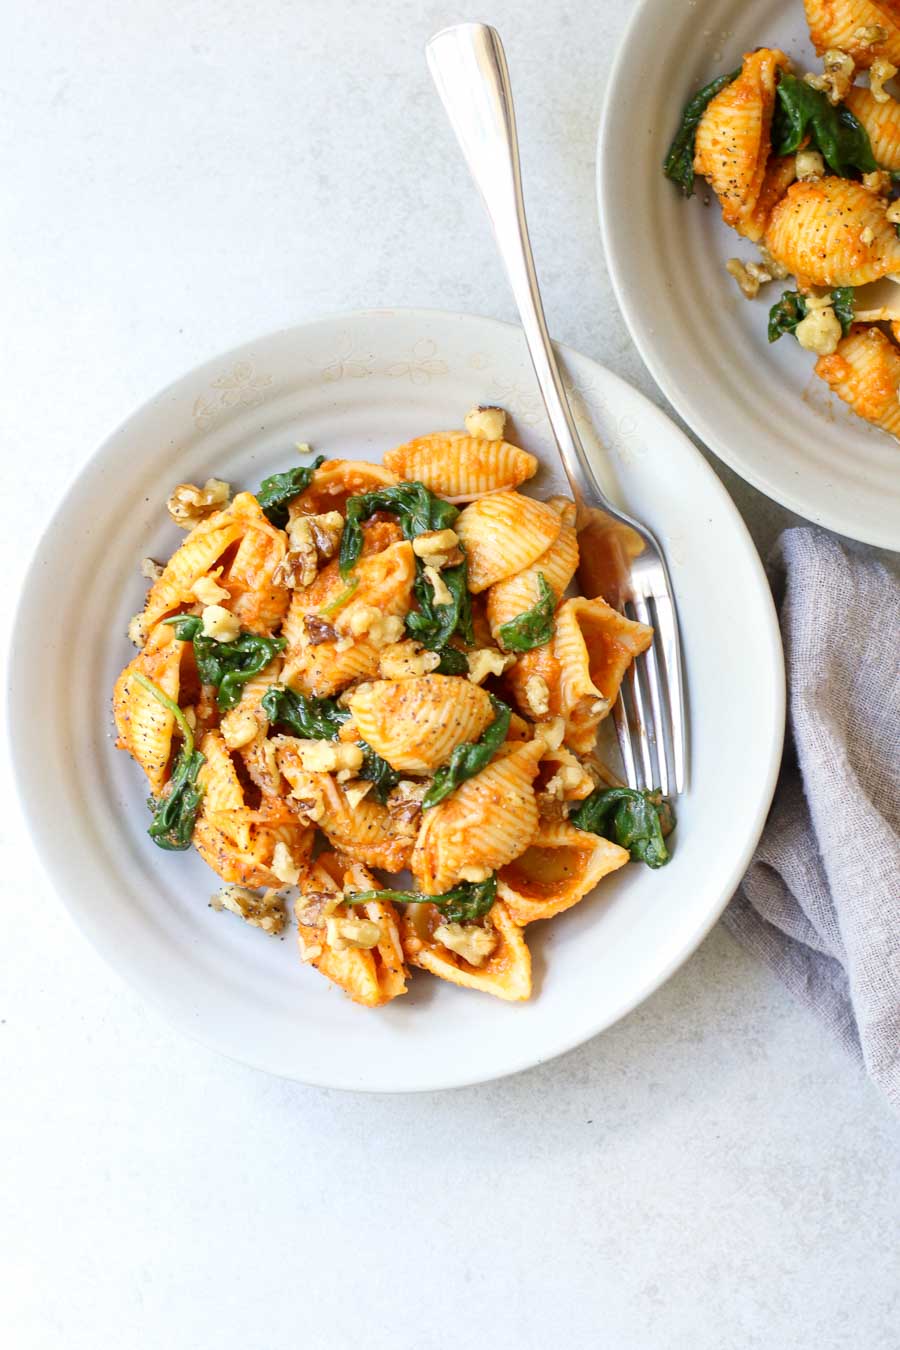 Pumpkin Pasta With Toasted Walnuts And Spinach